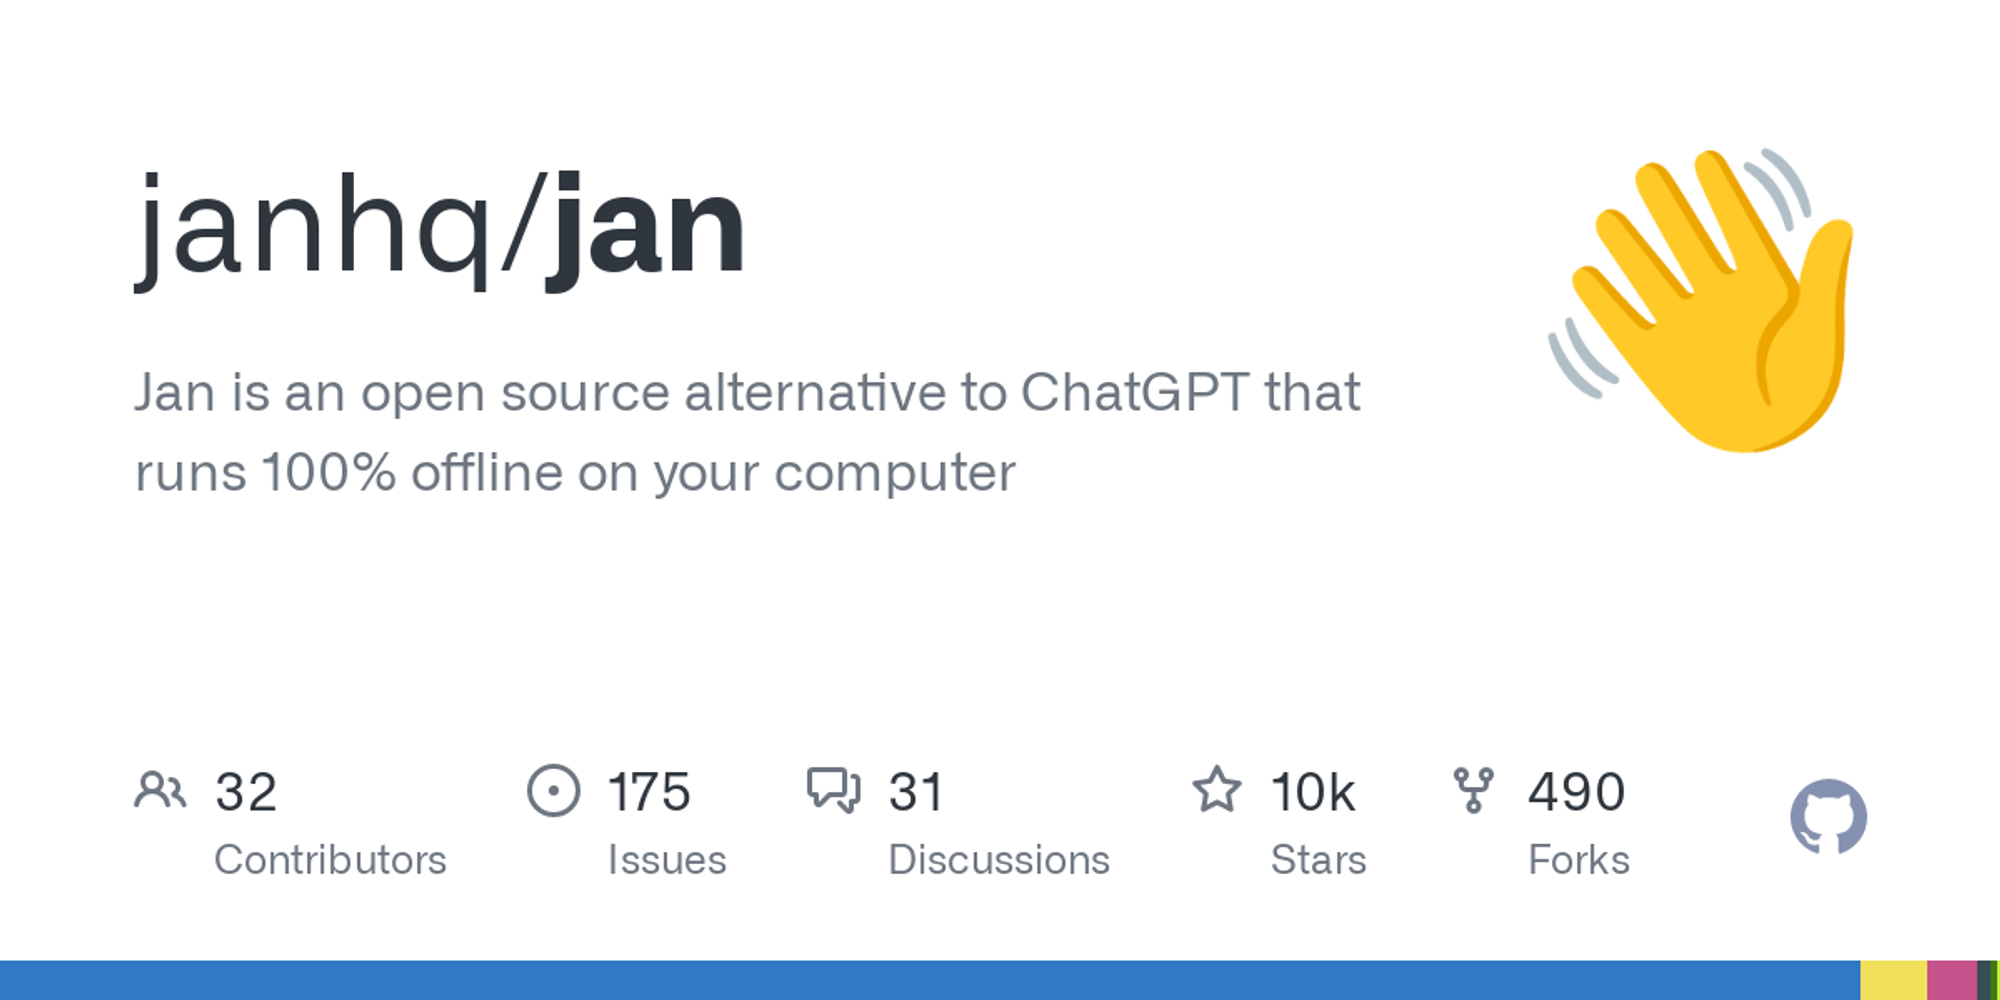 GitHub - janhq/jan: Jan is an open source alternative to ChatGPT that runs 100% offline on your computer